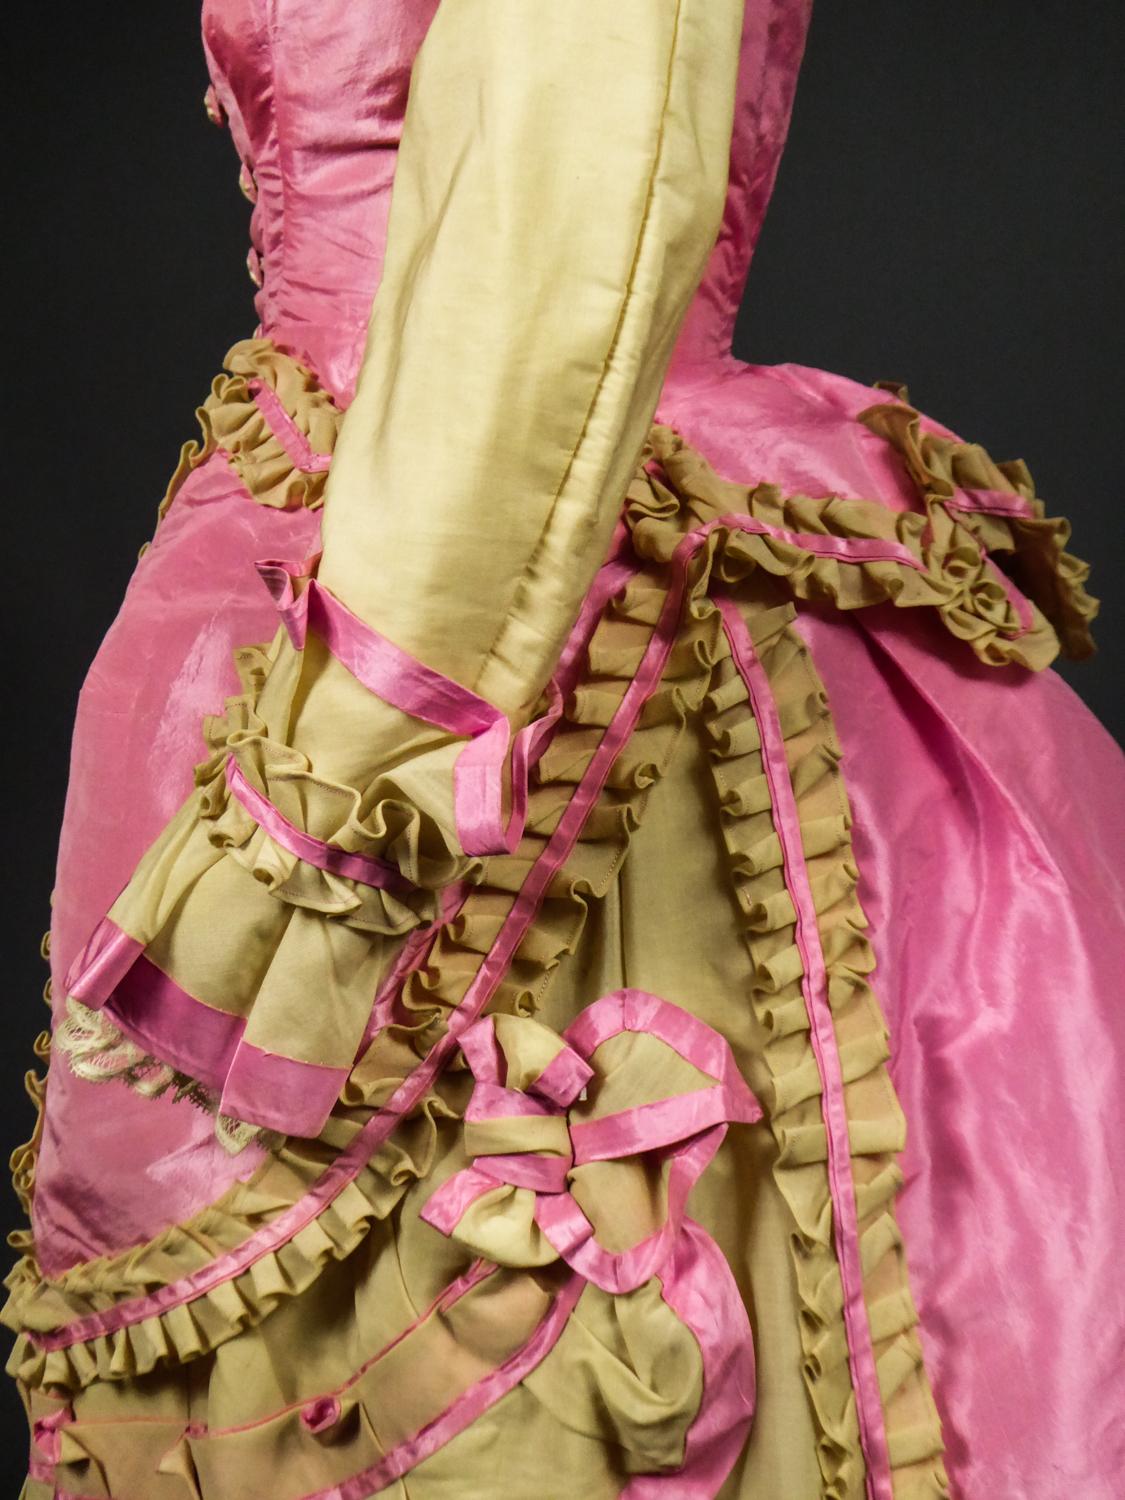 Circa 1875-1880
France Troisième République Period 

A bustle cage dress and peplum over dress in Eau du Nil challis and lustrous pink taffeta silk. Historicist inspiration of the Louis XIII style by the small puffed sleeves and the berthe collar of